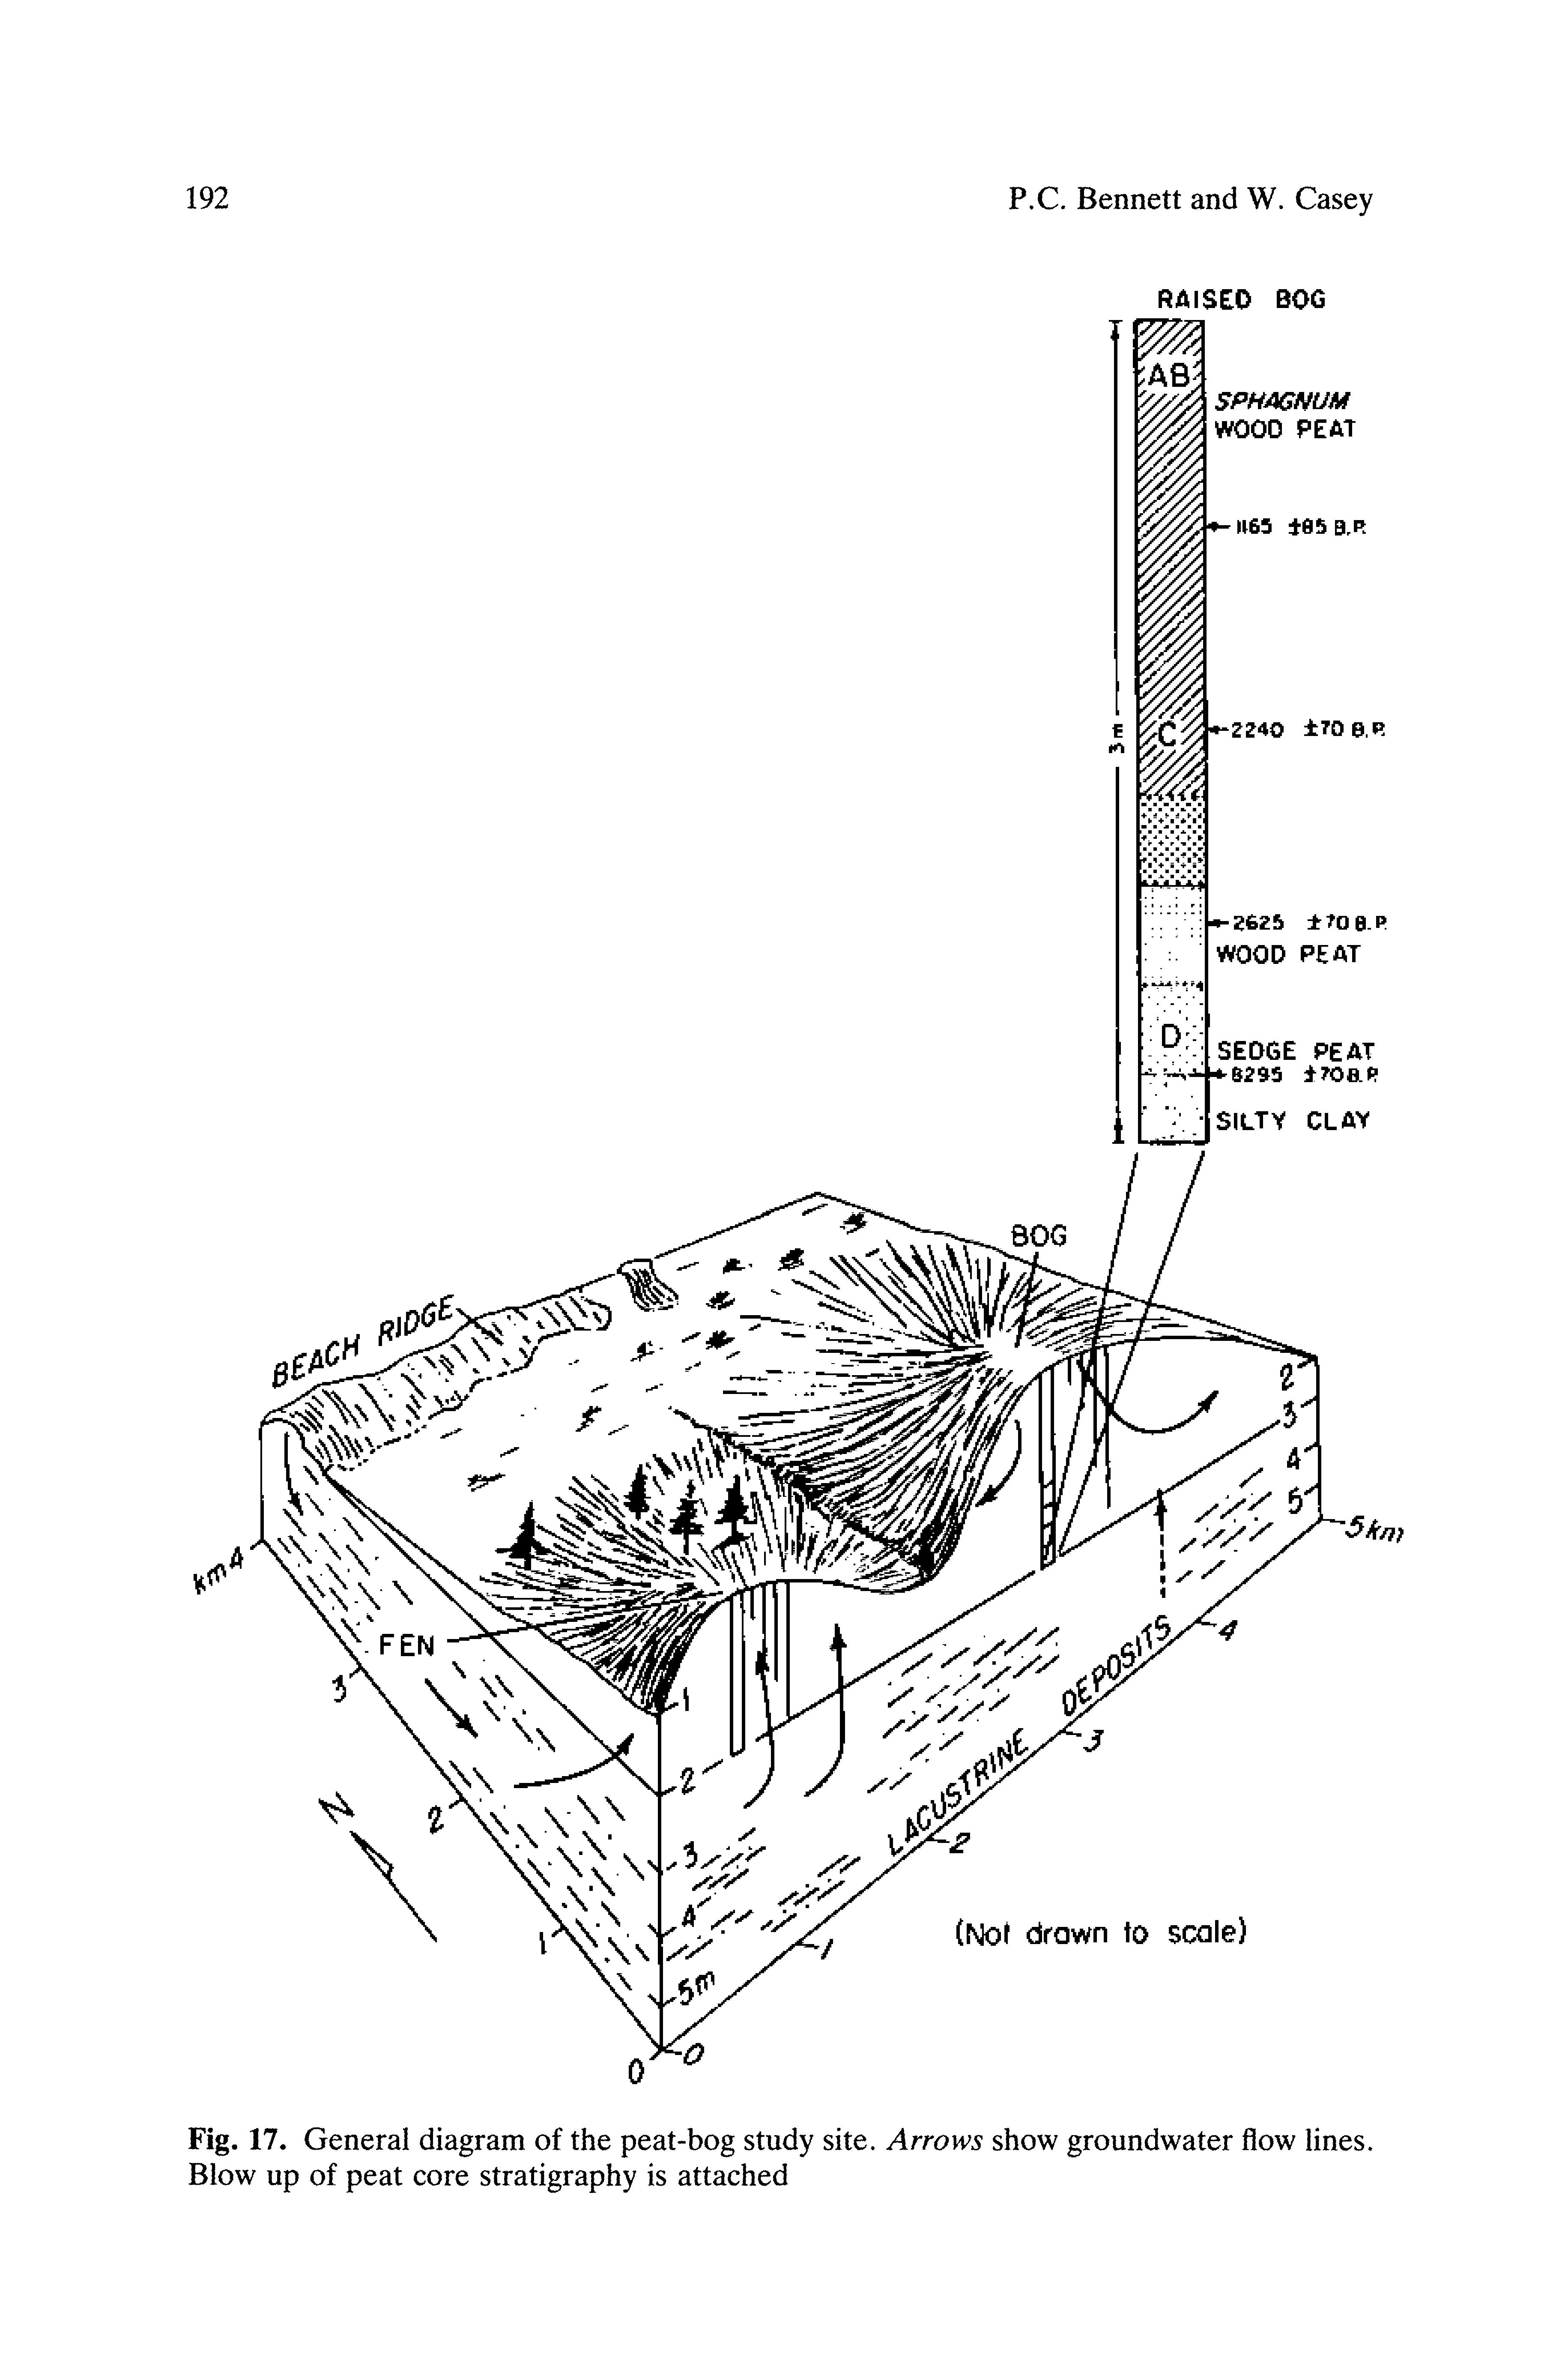 Fig. 17. General diagram of the peat-bog study site. Arrows show groundwater flow lines. Blow up of peat core stratigraphy is attached...